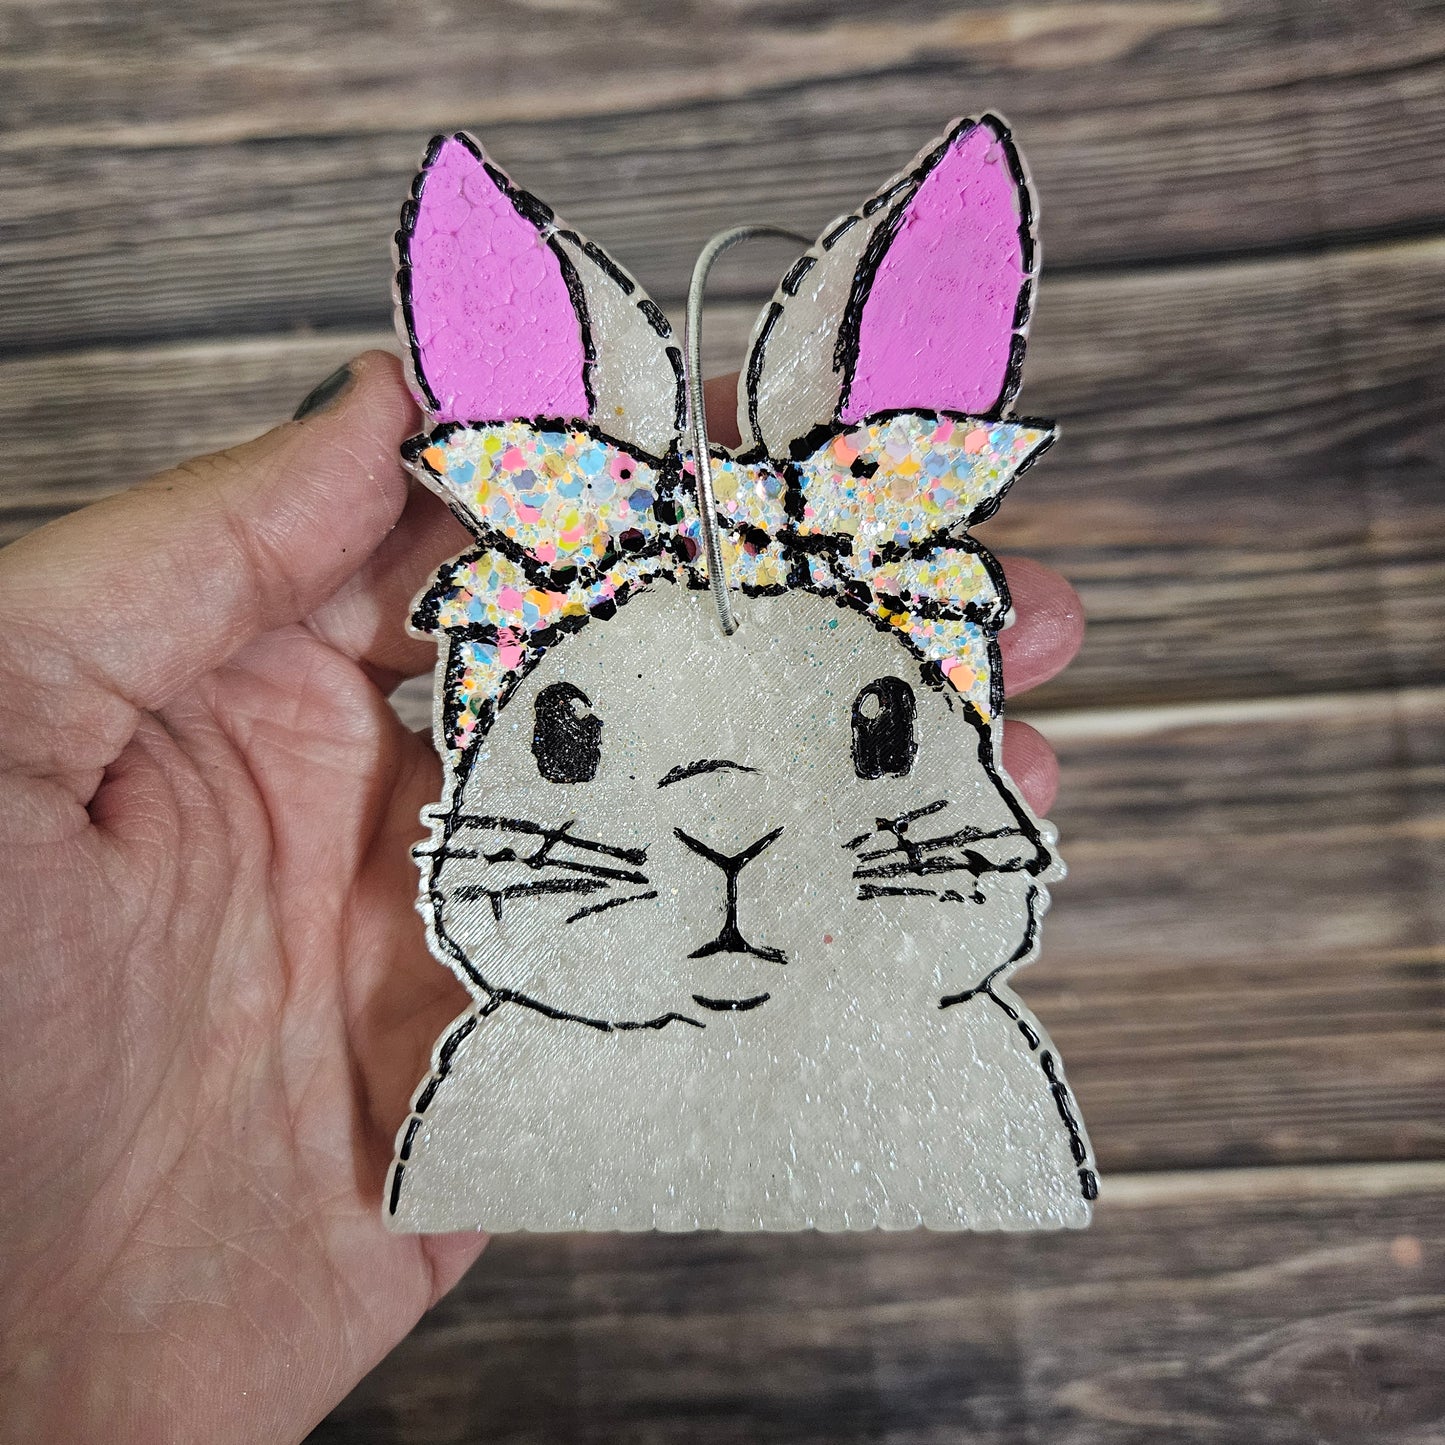 Bunny with Bow